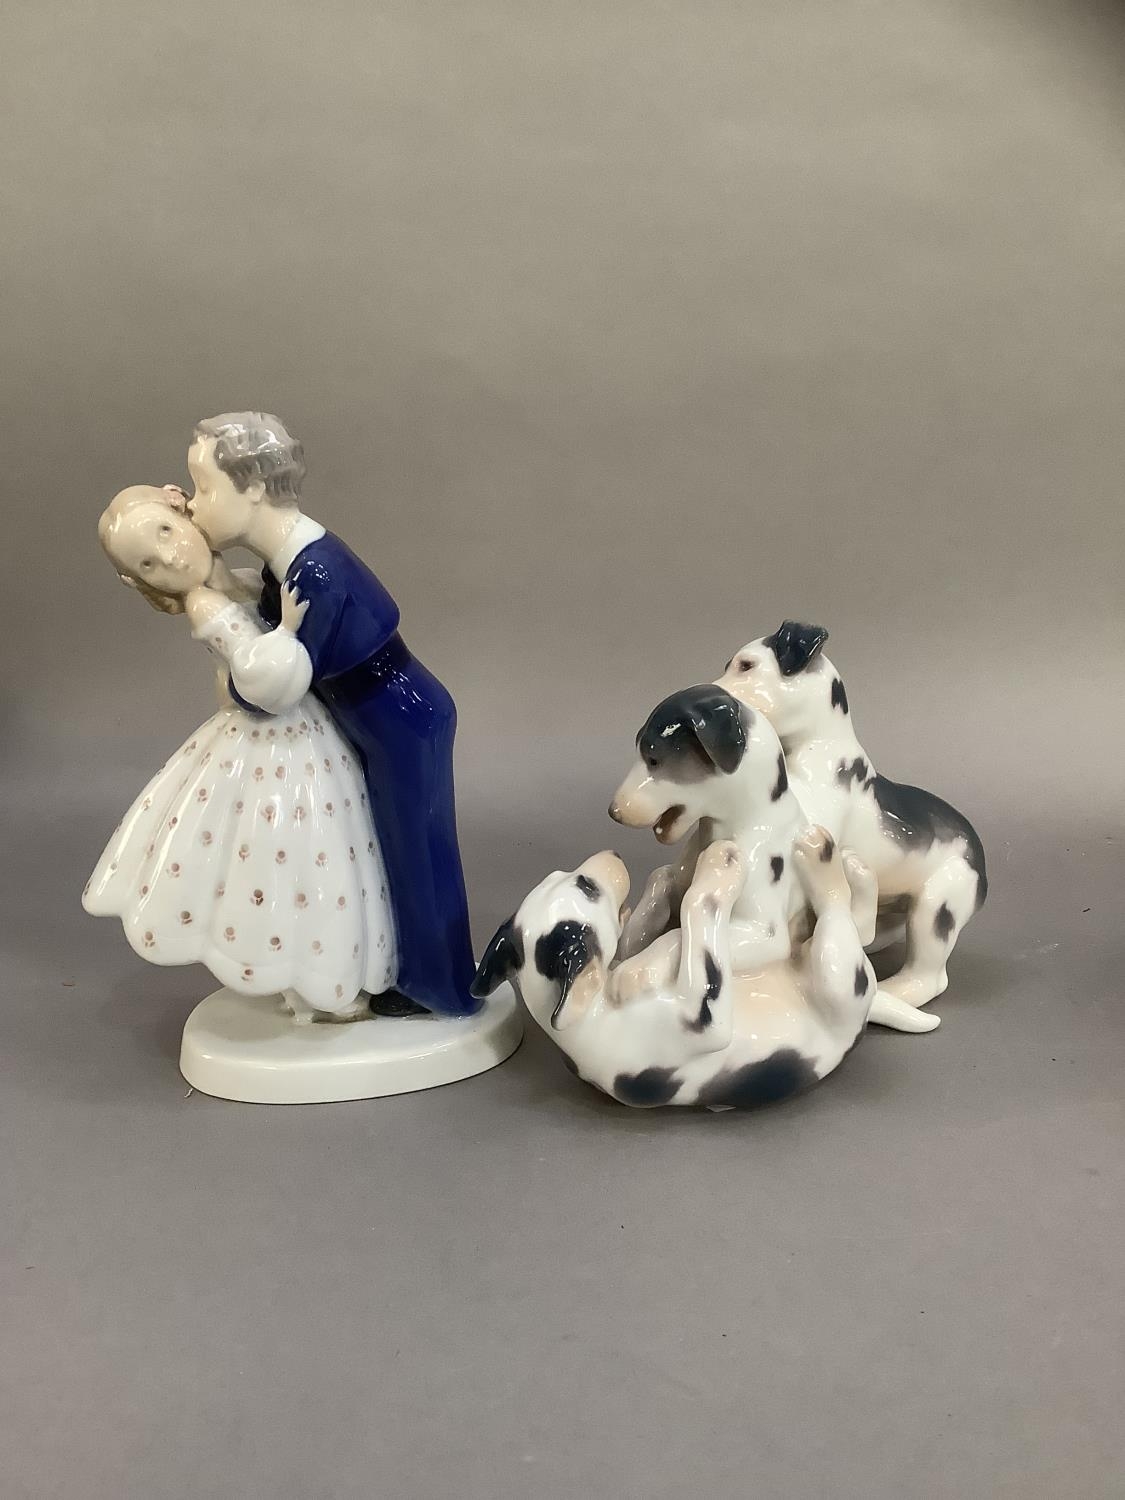 A Bing and Grondahl figure group of three playing terrier pups, no.1815 together with another figure